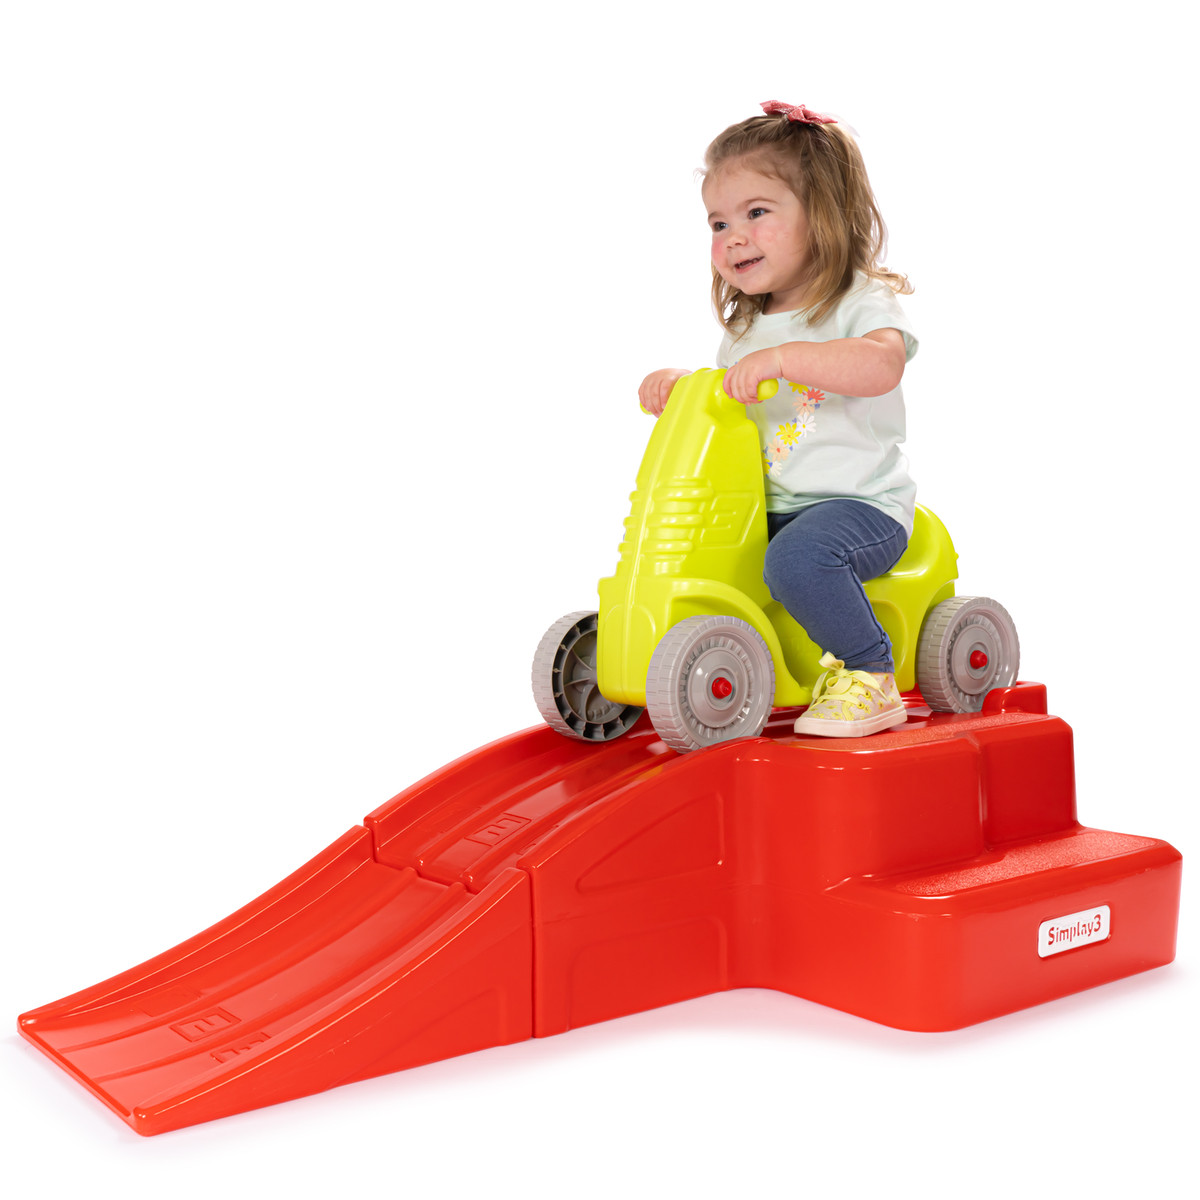 Child seated in ride on car ready to coast down at home roller coaster ramp